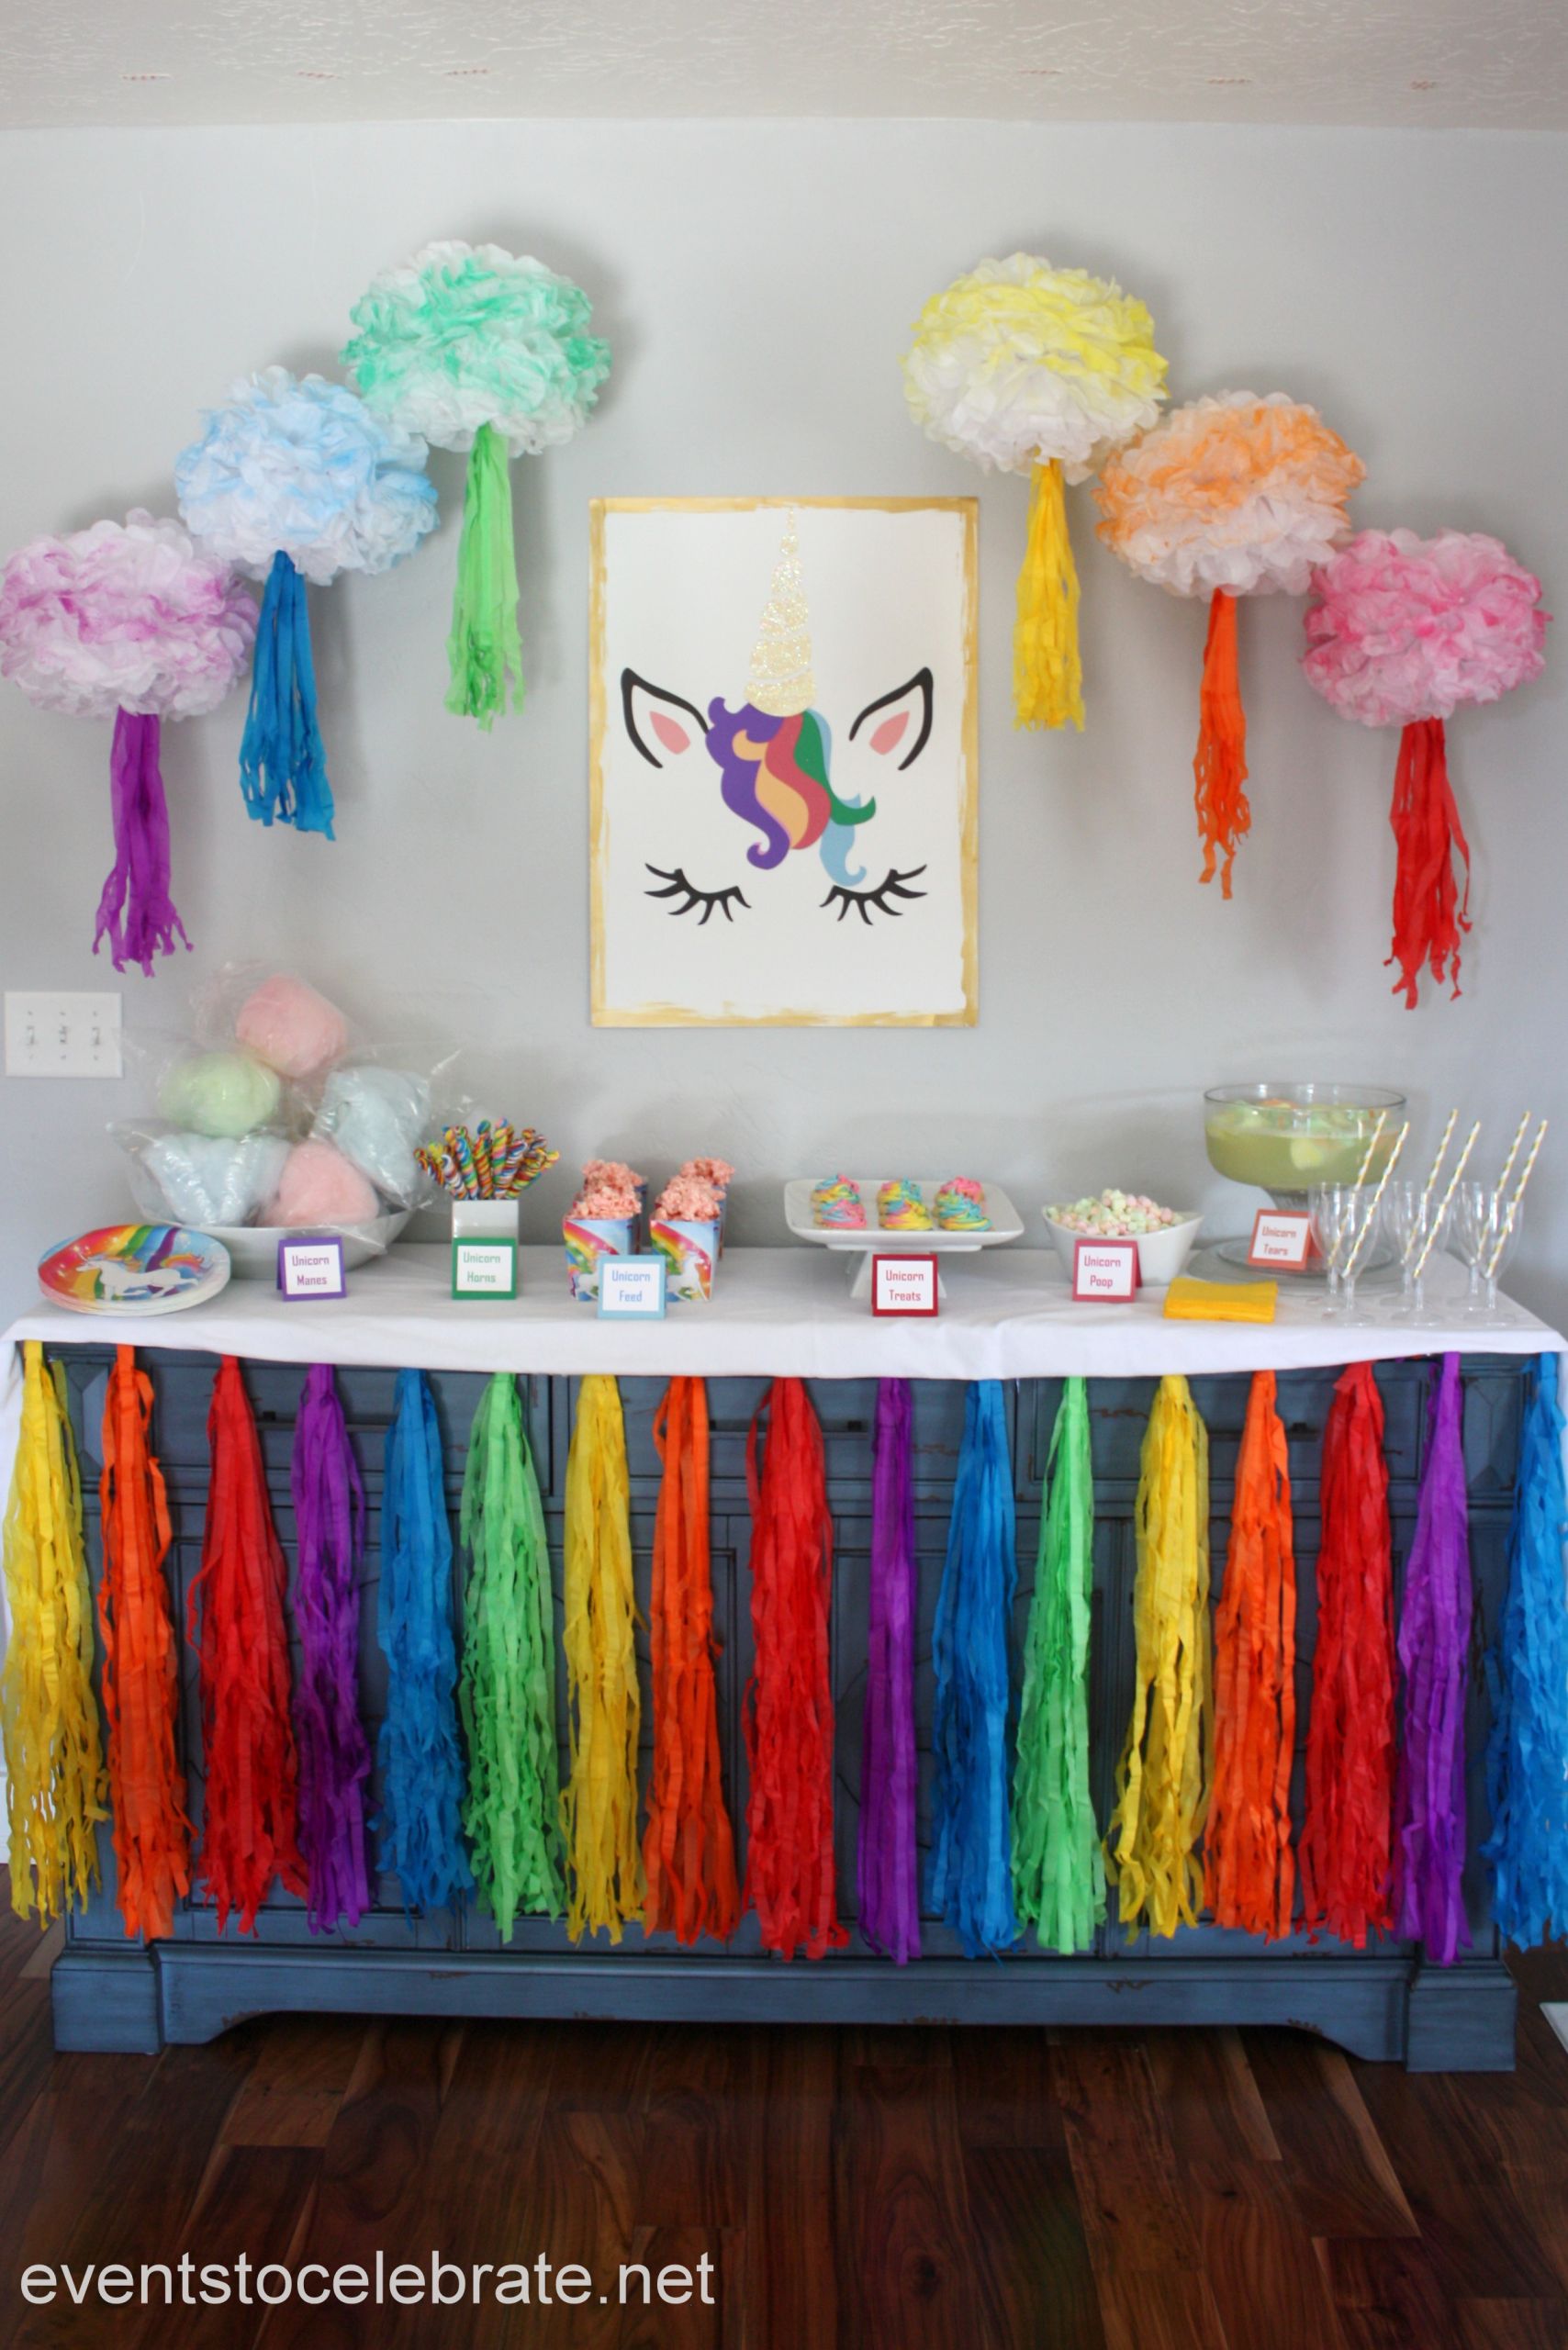 Unicorn Party Centerpiece Ideas
 Unicorn Party Decorations and Food